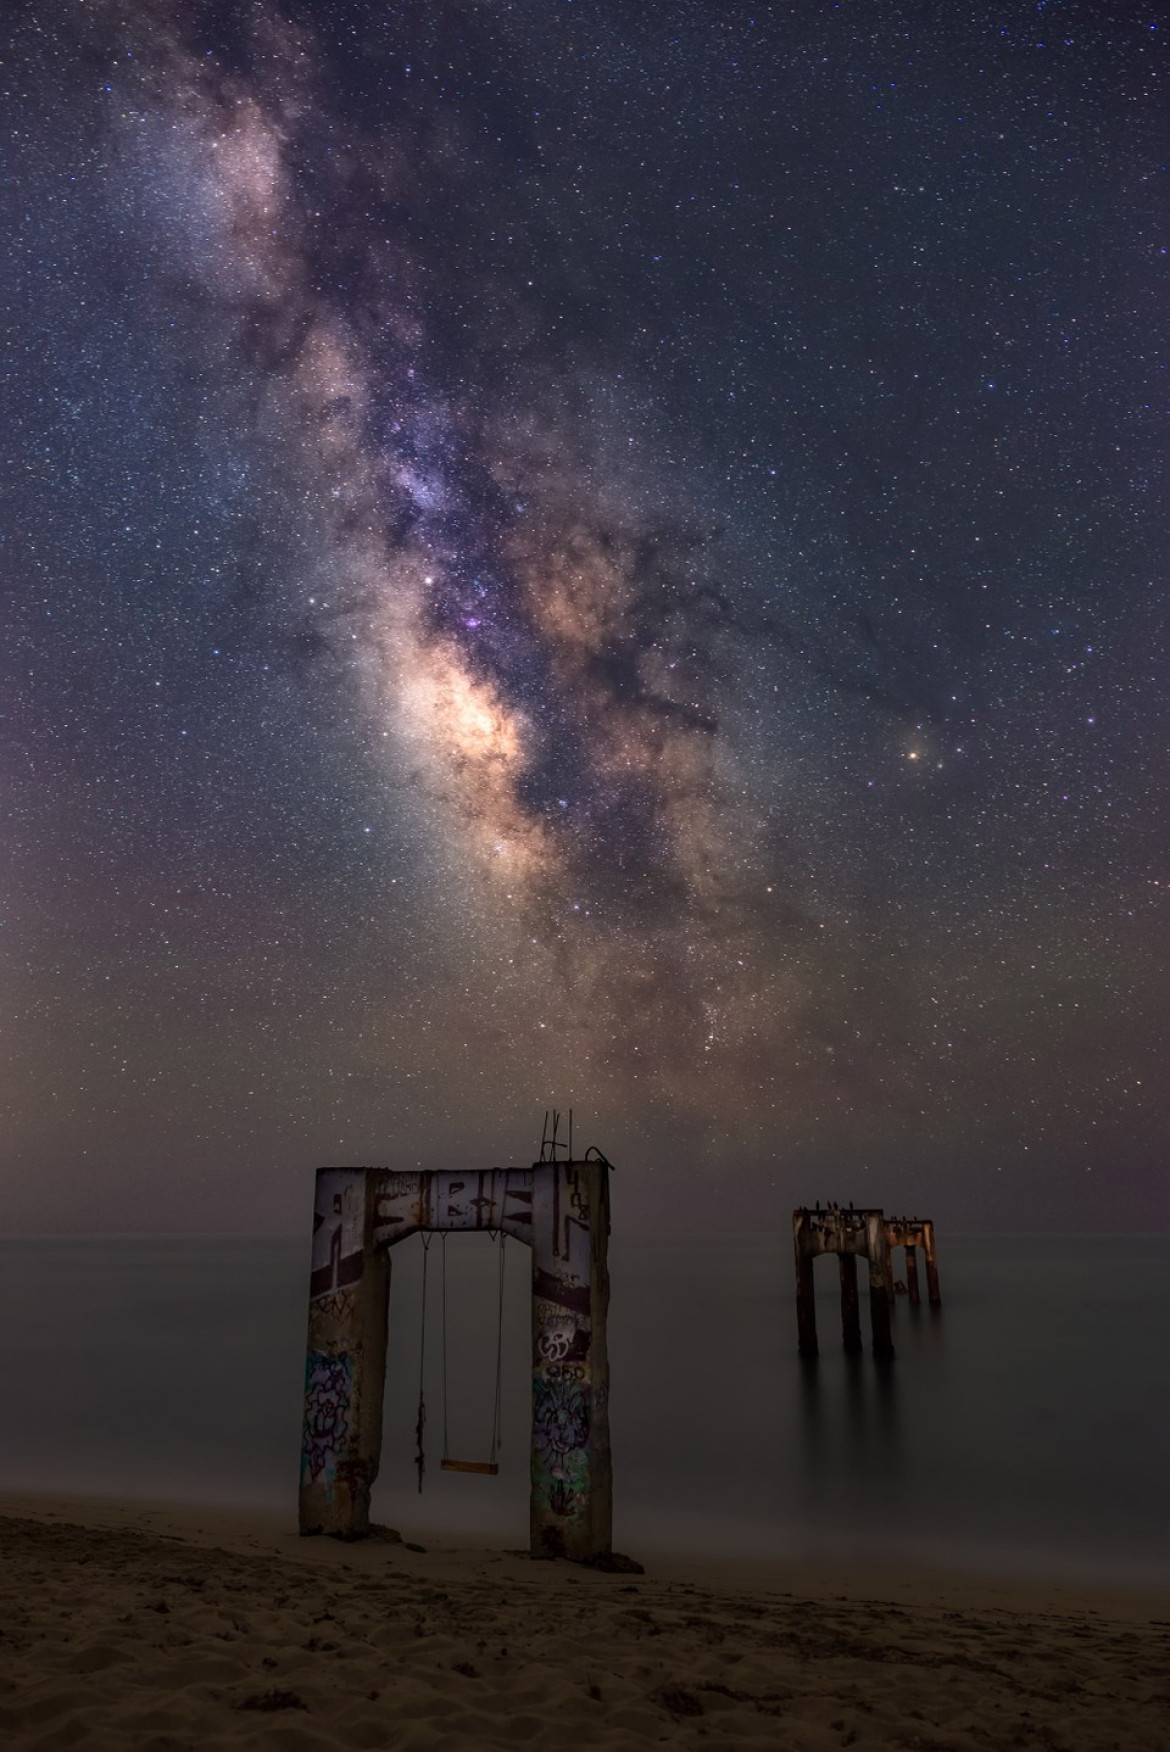 fot. Marcin Zając, "The Remnants" / Insight Investment Astronomy Photographer of the Year 2019